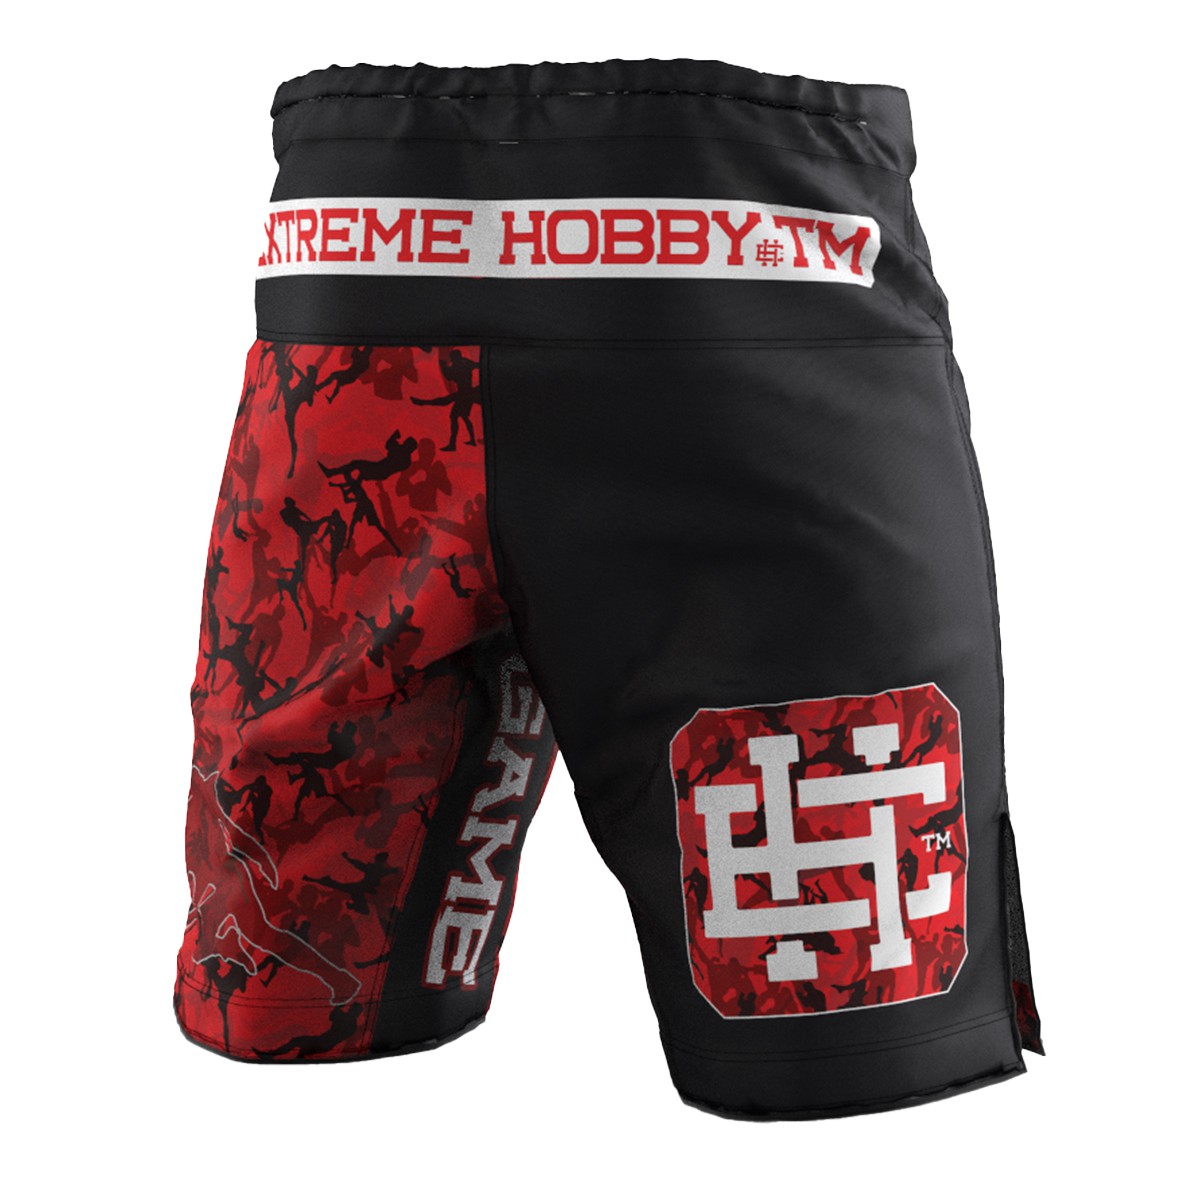 Grappling shorts kids for RED WARRIOR Extreme Hobby